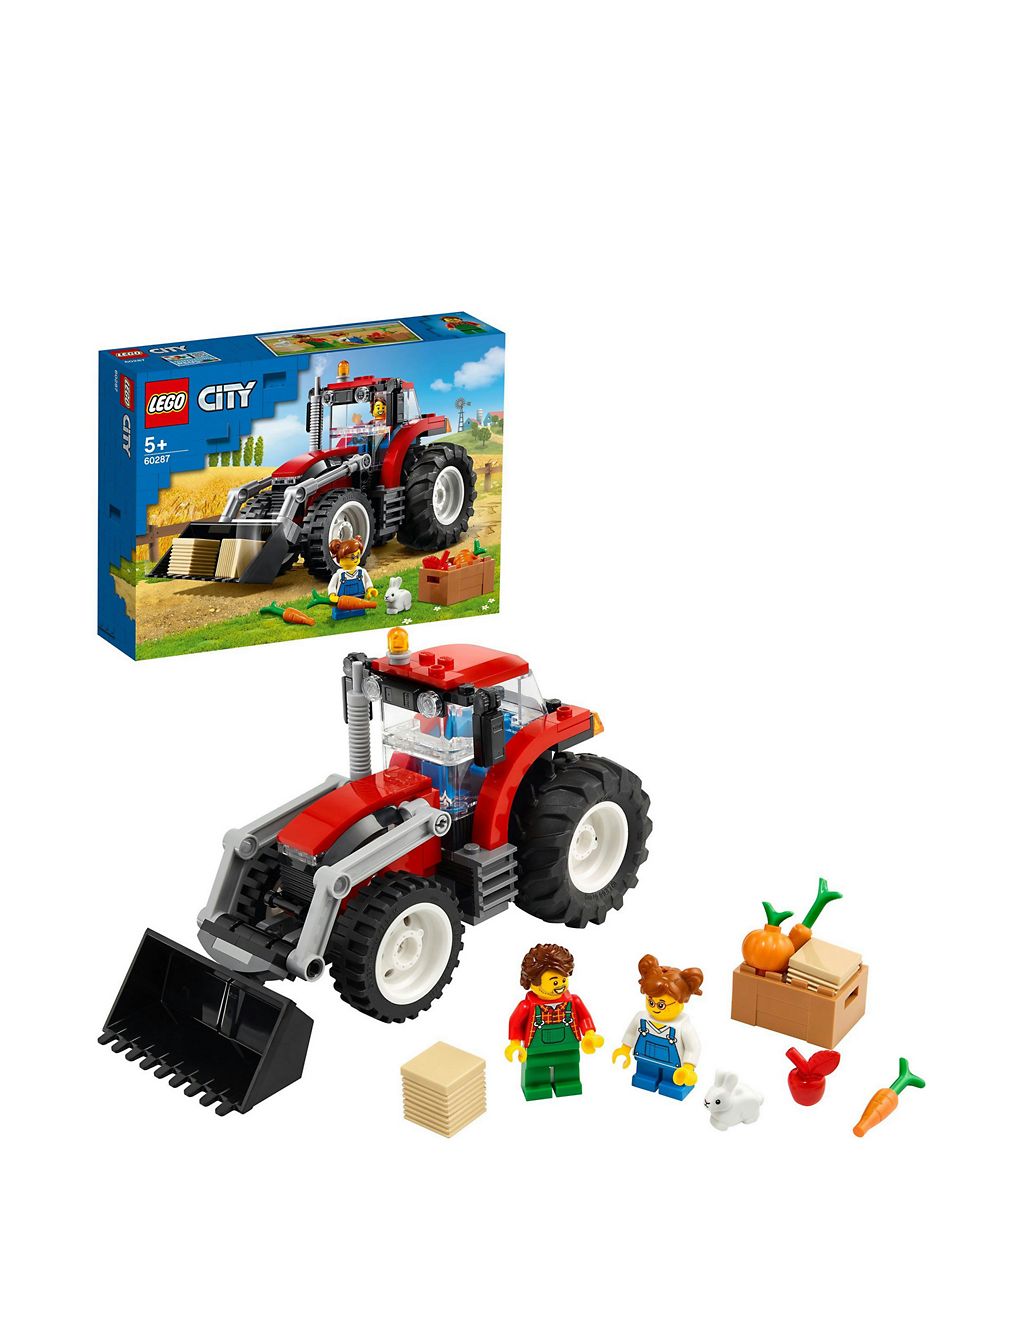 LEGO® City Tractor 60287 (5+ Yrs) 3 of 6